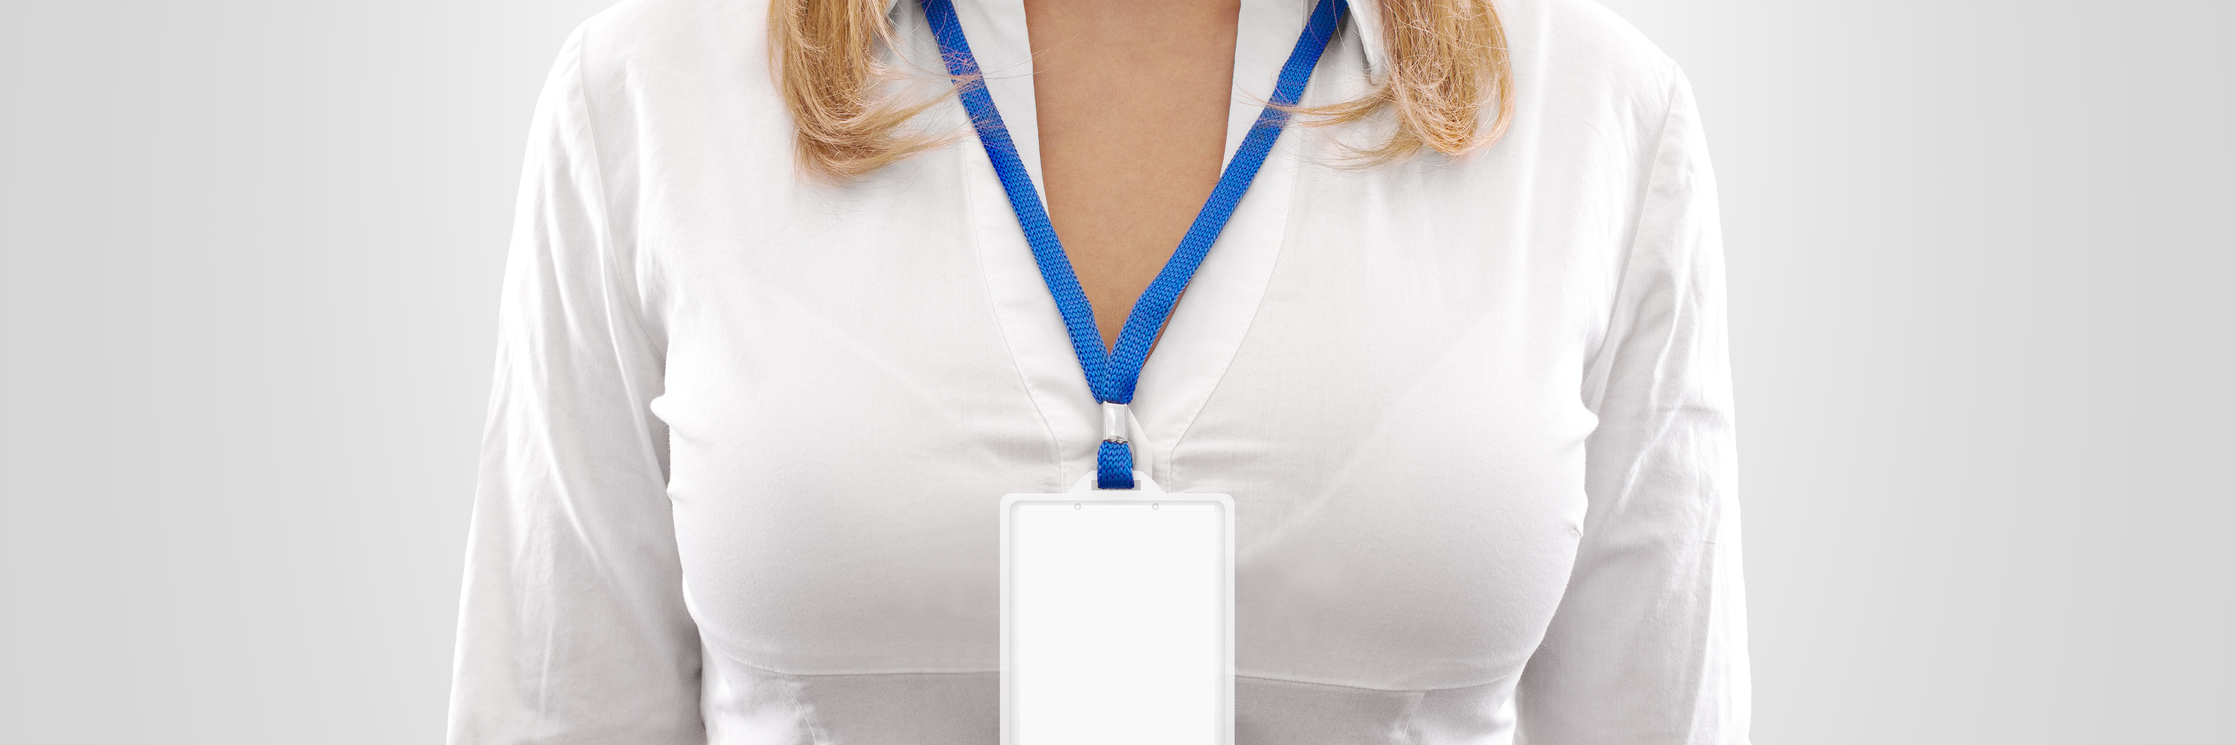 woman wearing a blank id badge around her neck